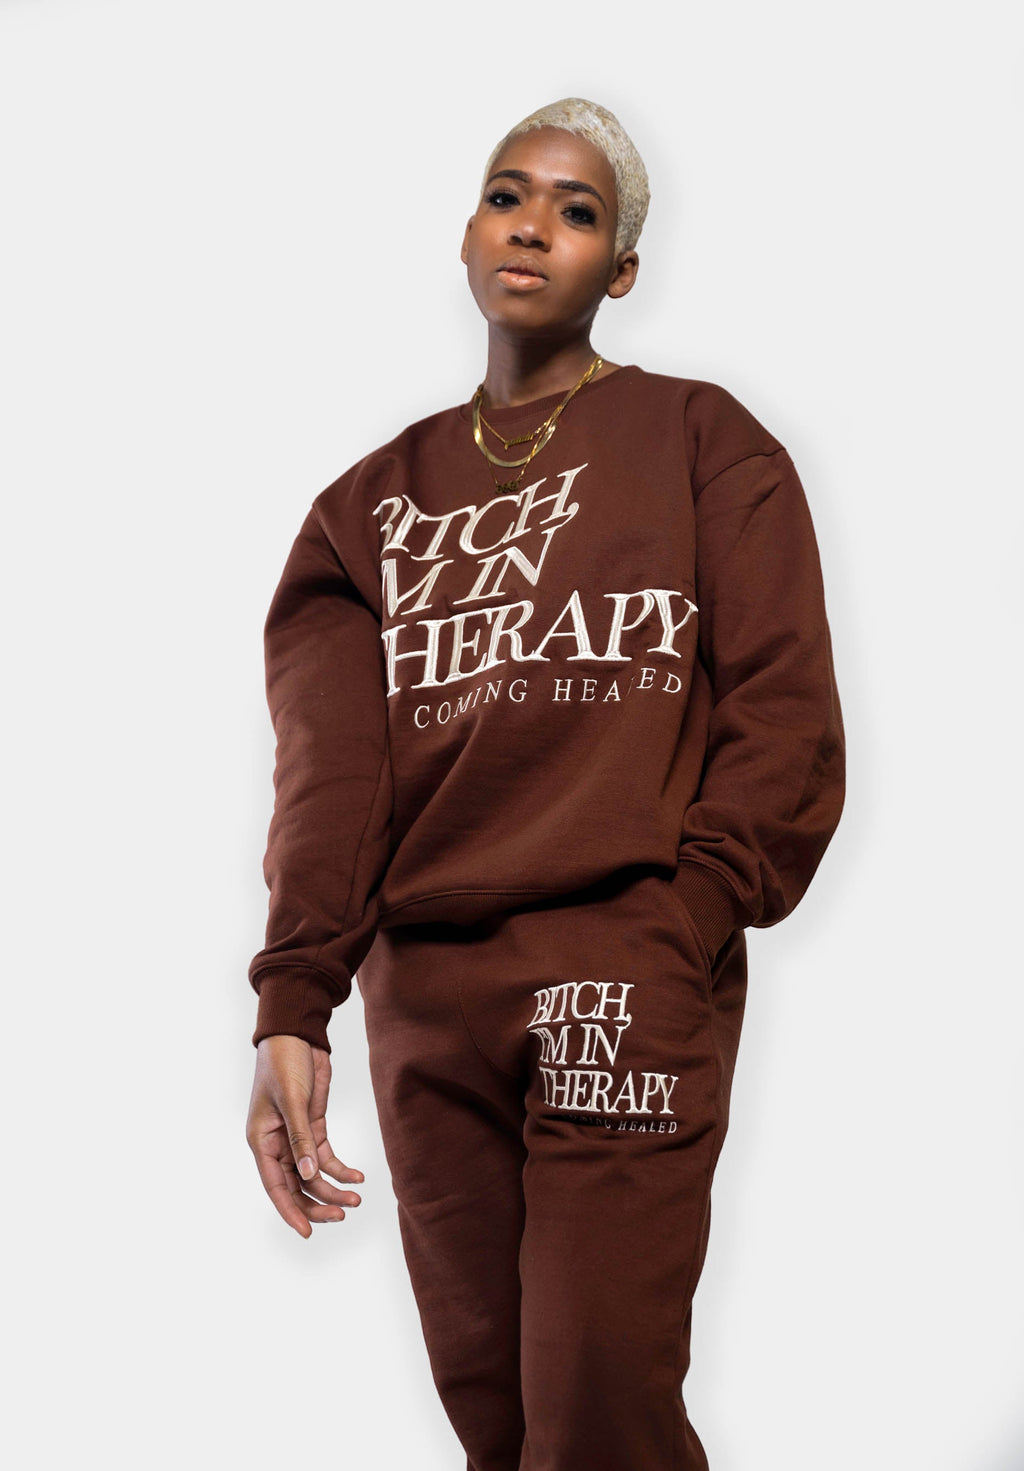 BITCH, I'M IN THERAPY; COMING HEALED Brown Crewneck